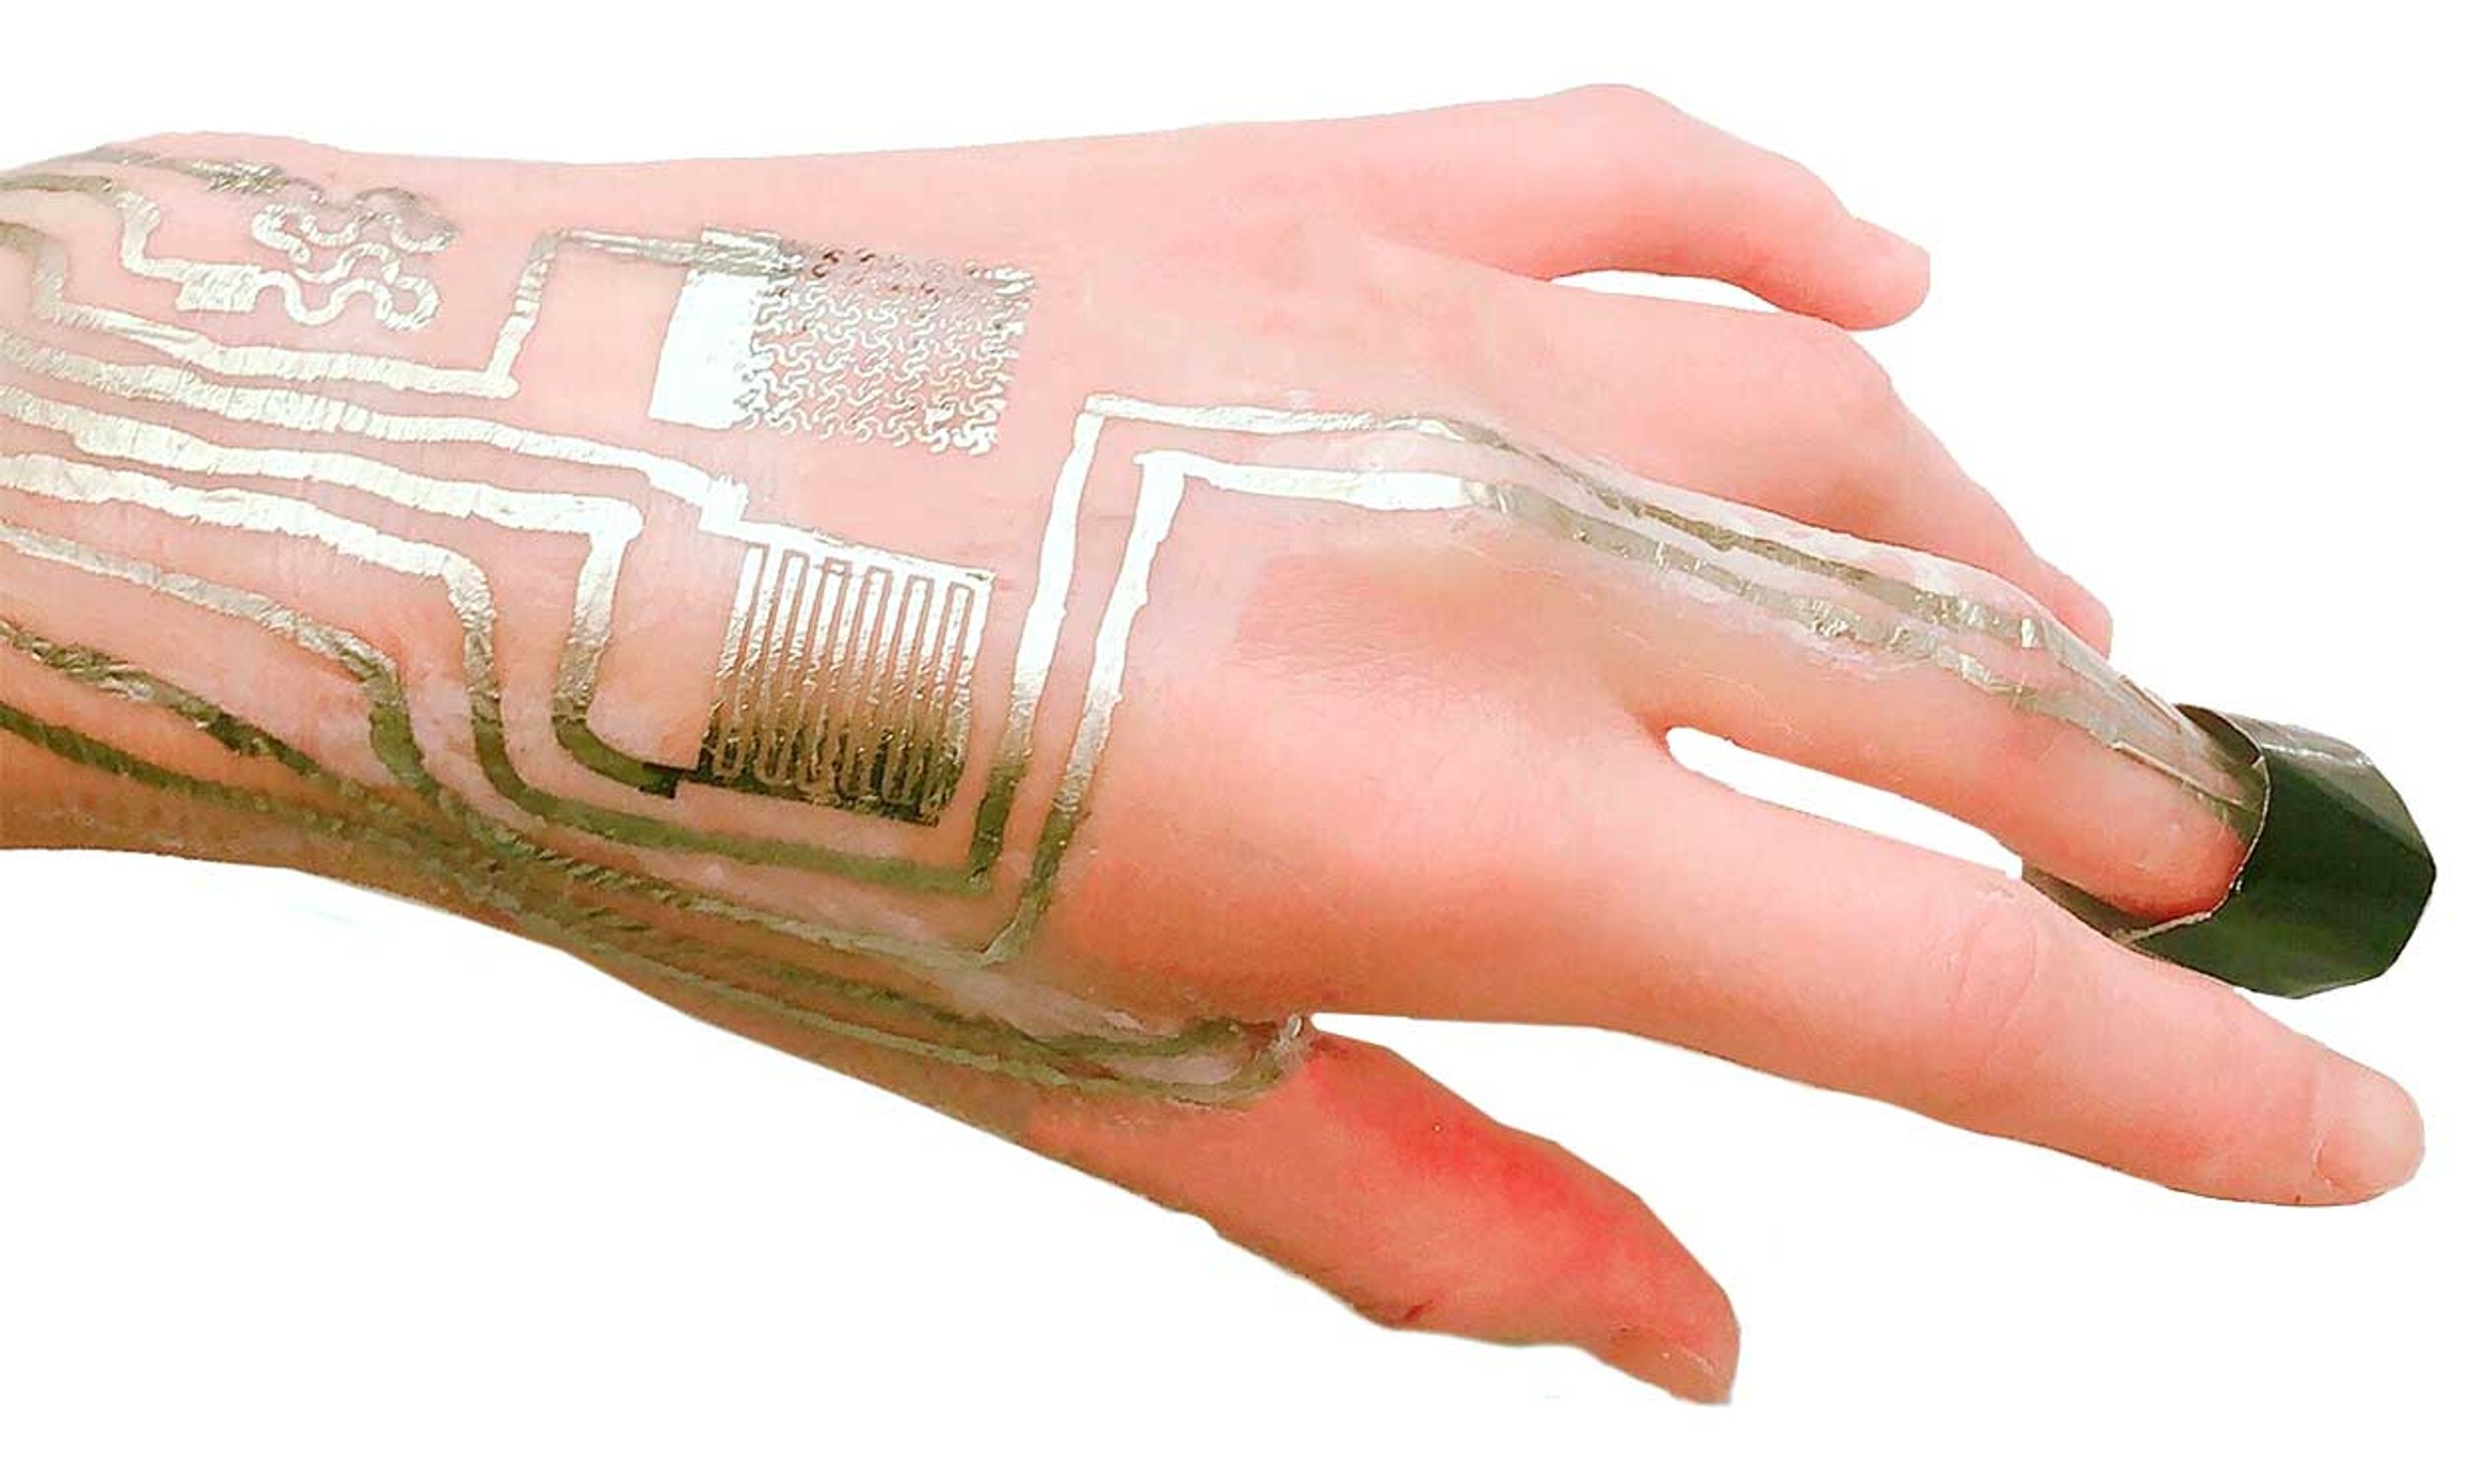 Photograph of a hand with on-body sensors, such as electrodes and temperature sensors, which were directly printed and sintered on the skin surface. On-body sensors, such as electrodes and temperature sensors, were directly printed and sintered on the ski